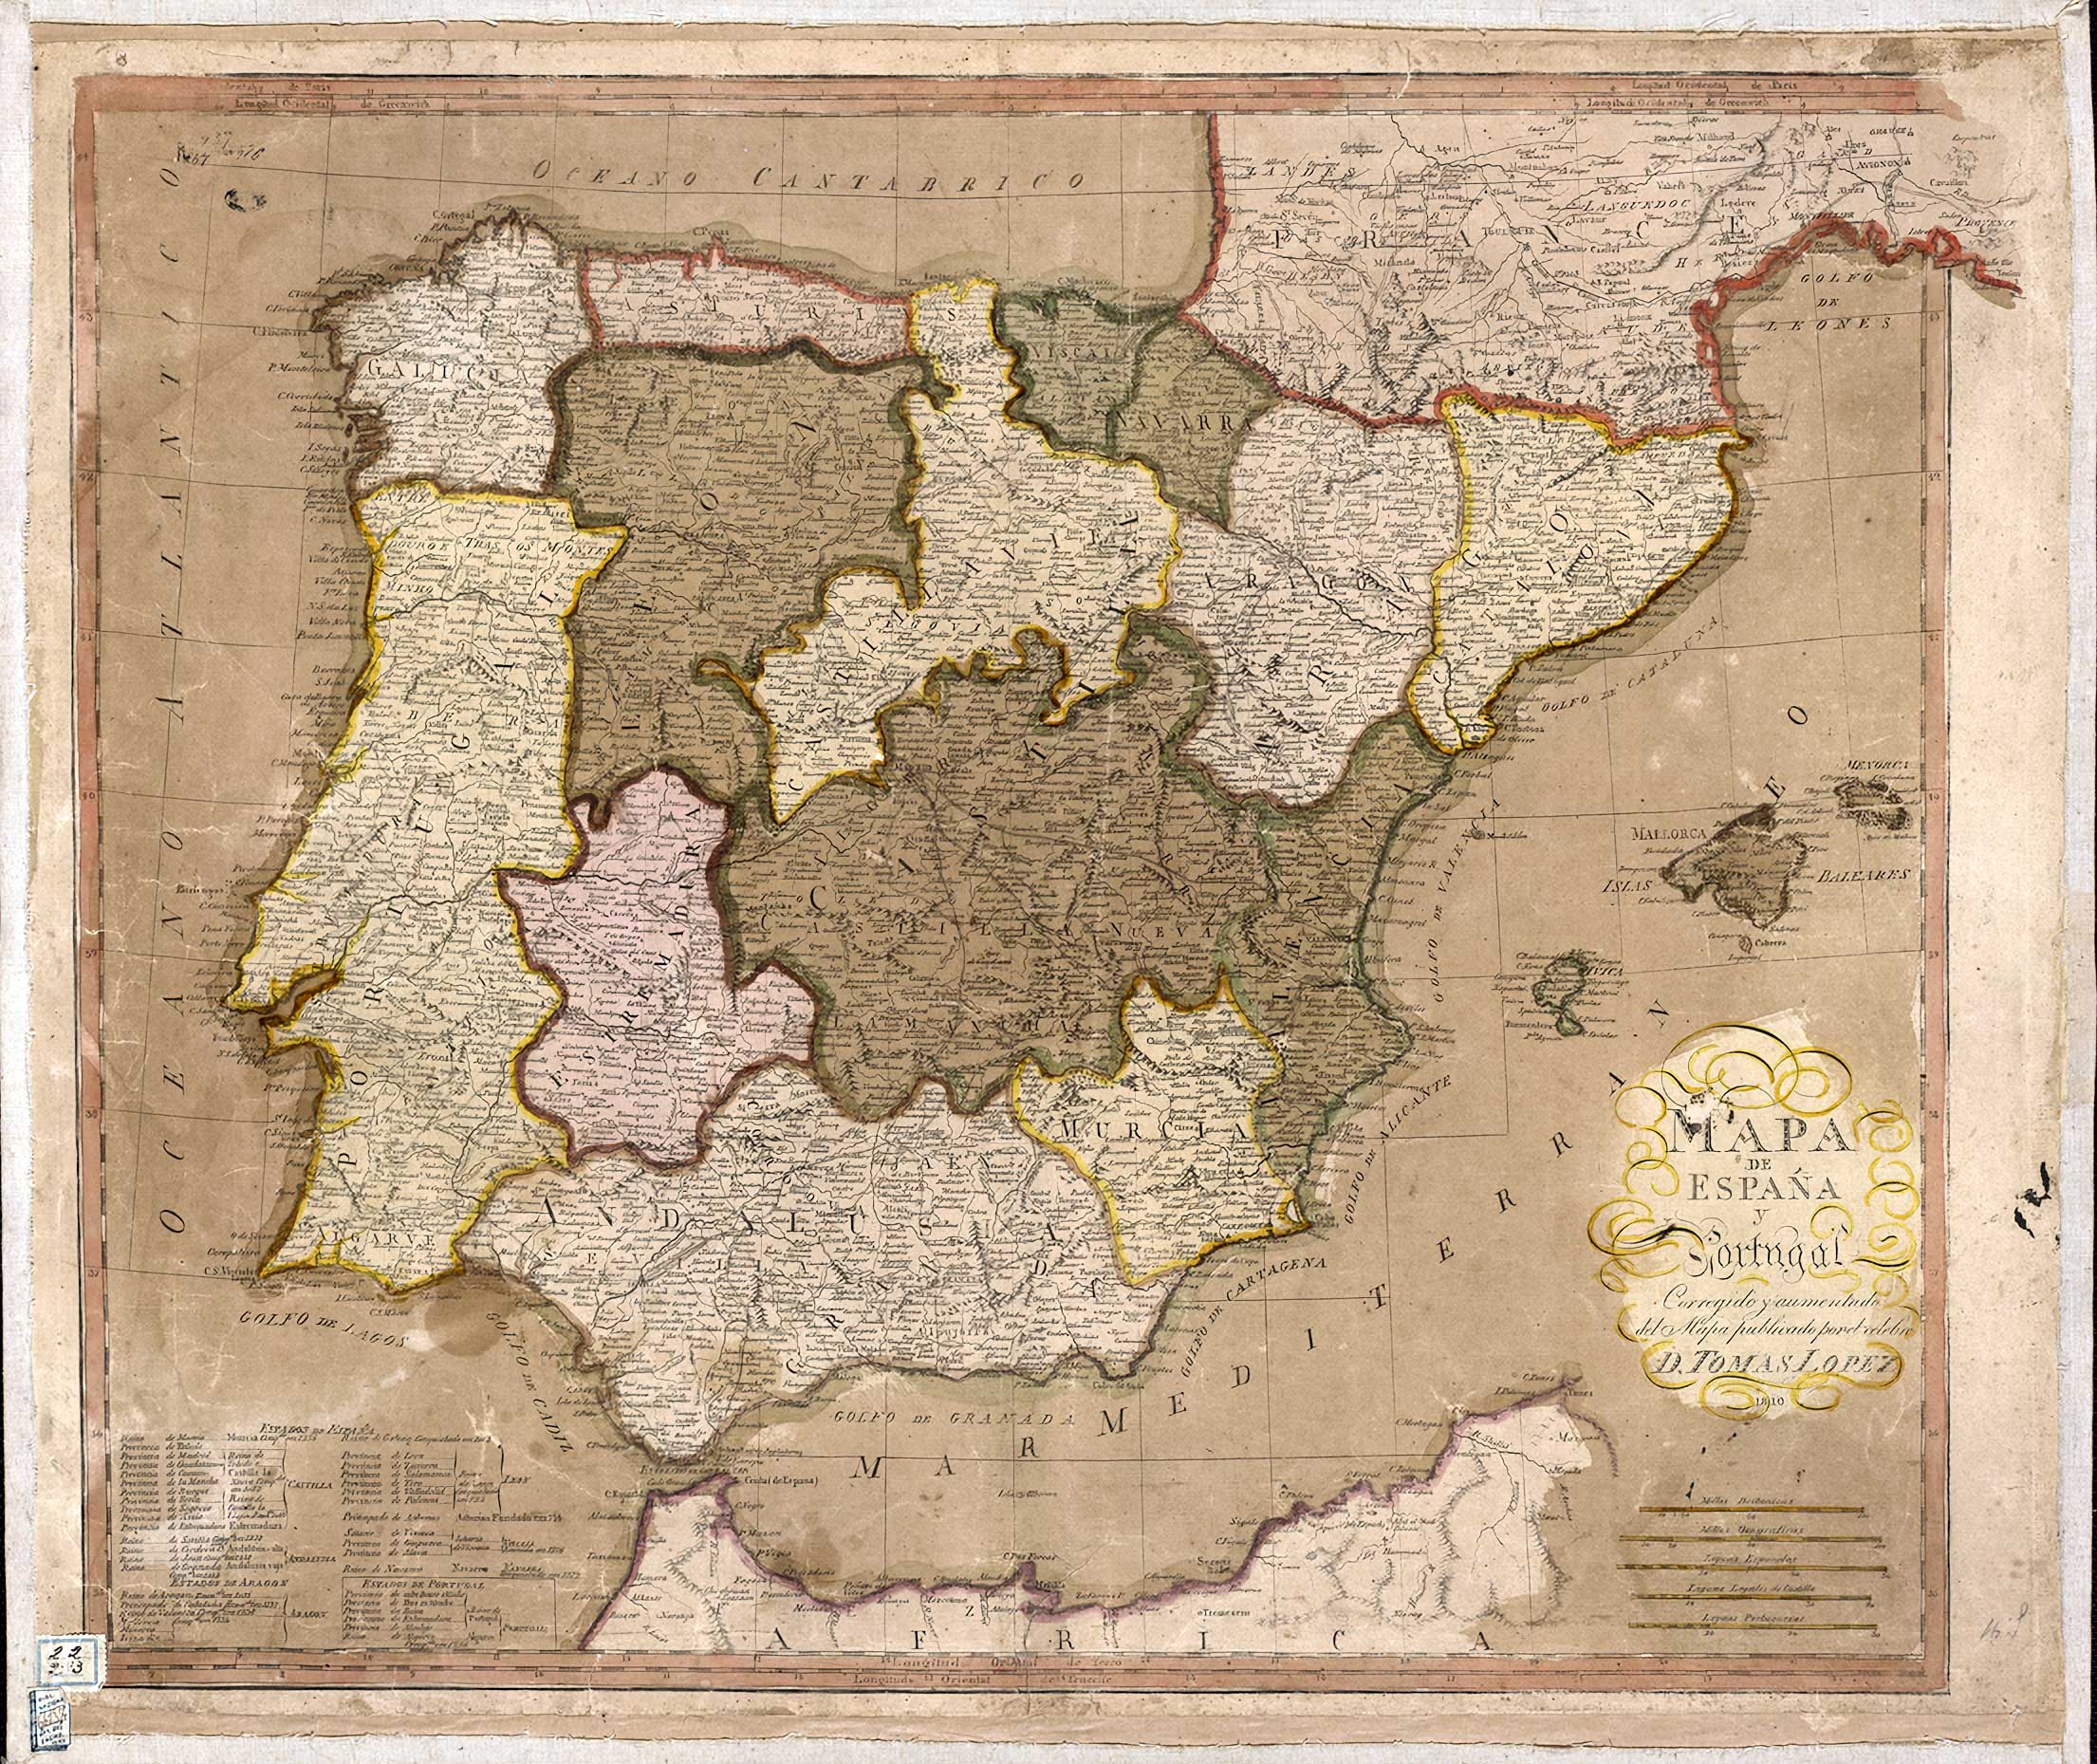 Map of Spain and Portugal (D. Tomas Lopez - 1810)